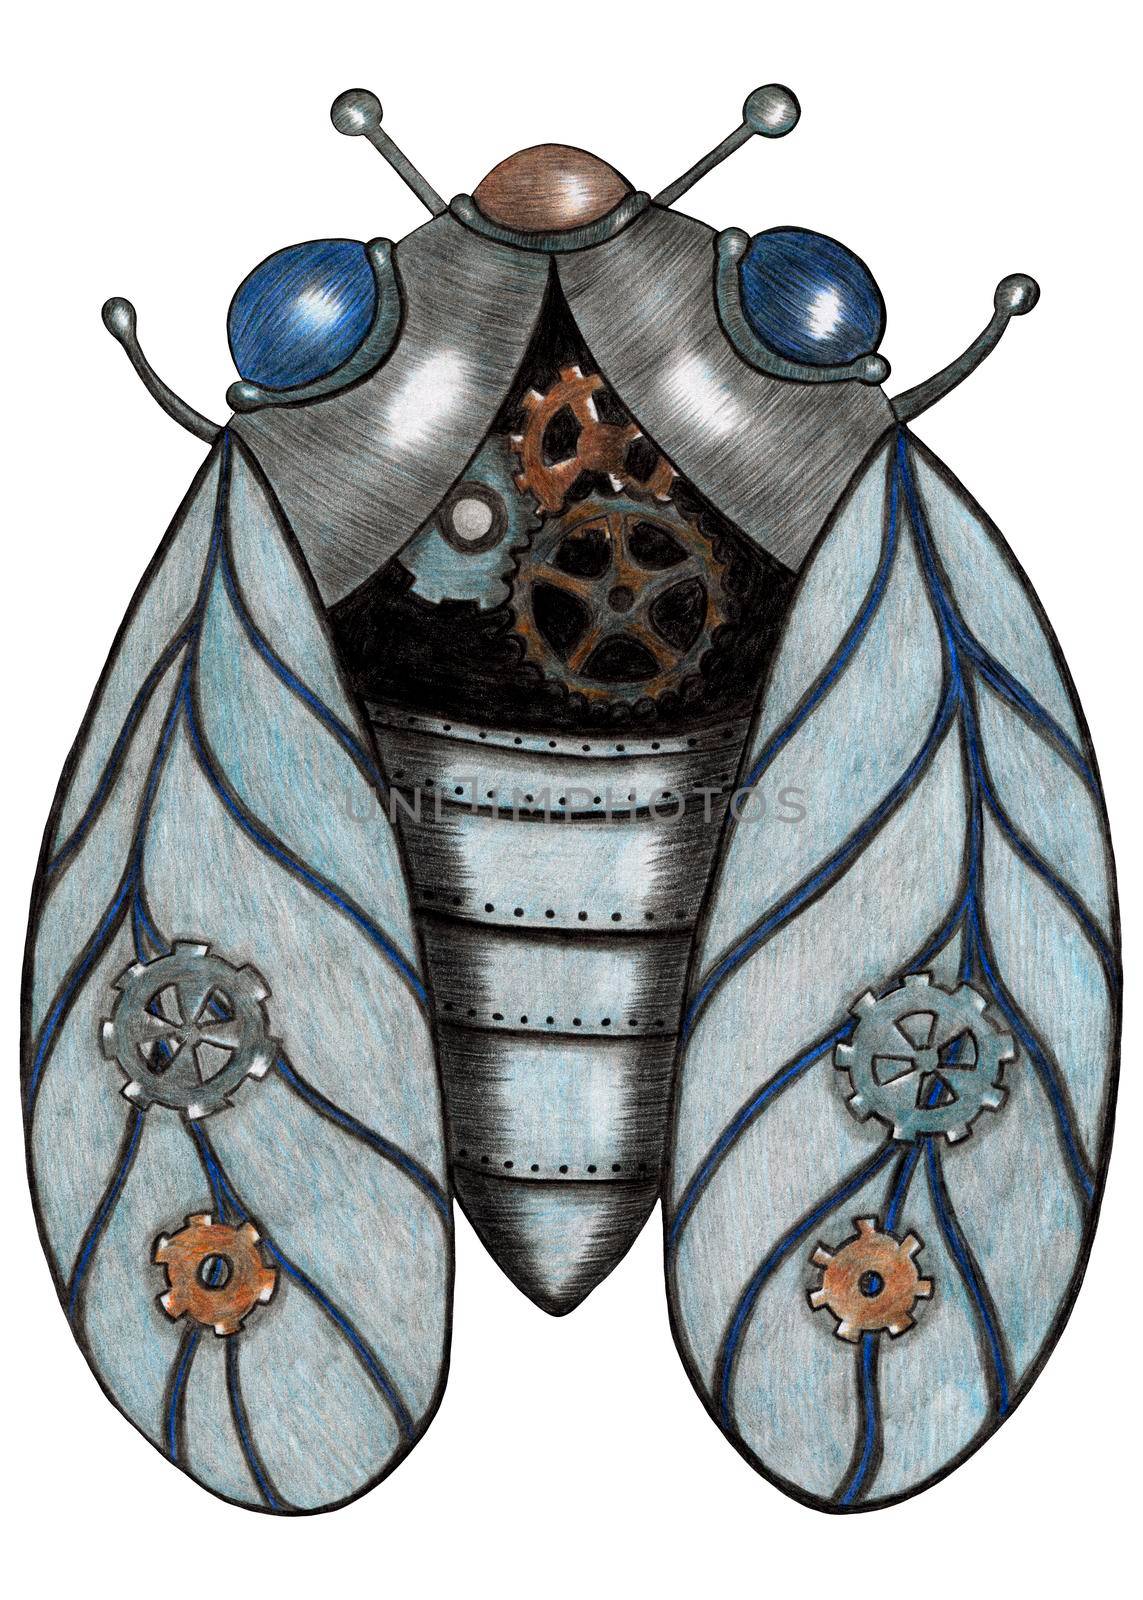 Design Element Hand Drawn Illustration of Colorful Steampunk Cicada Isolated on White Background. Steampunk Cicada Drawn by Colored Pencils.